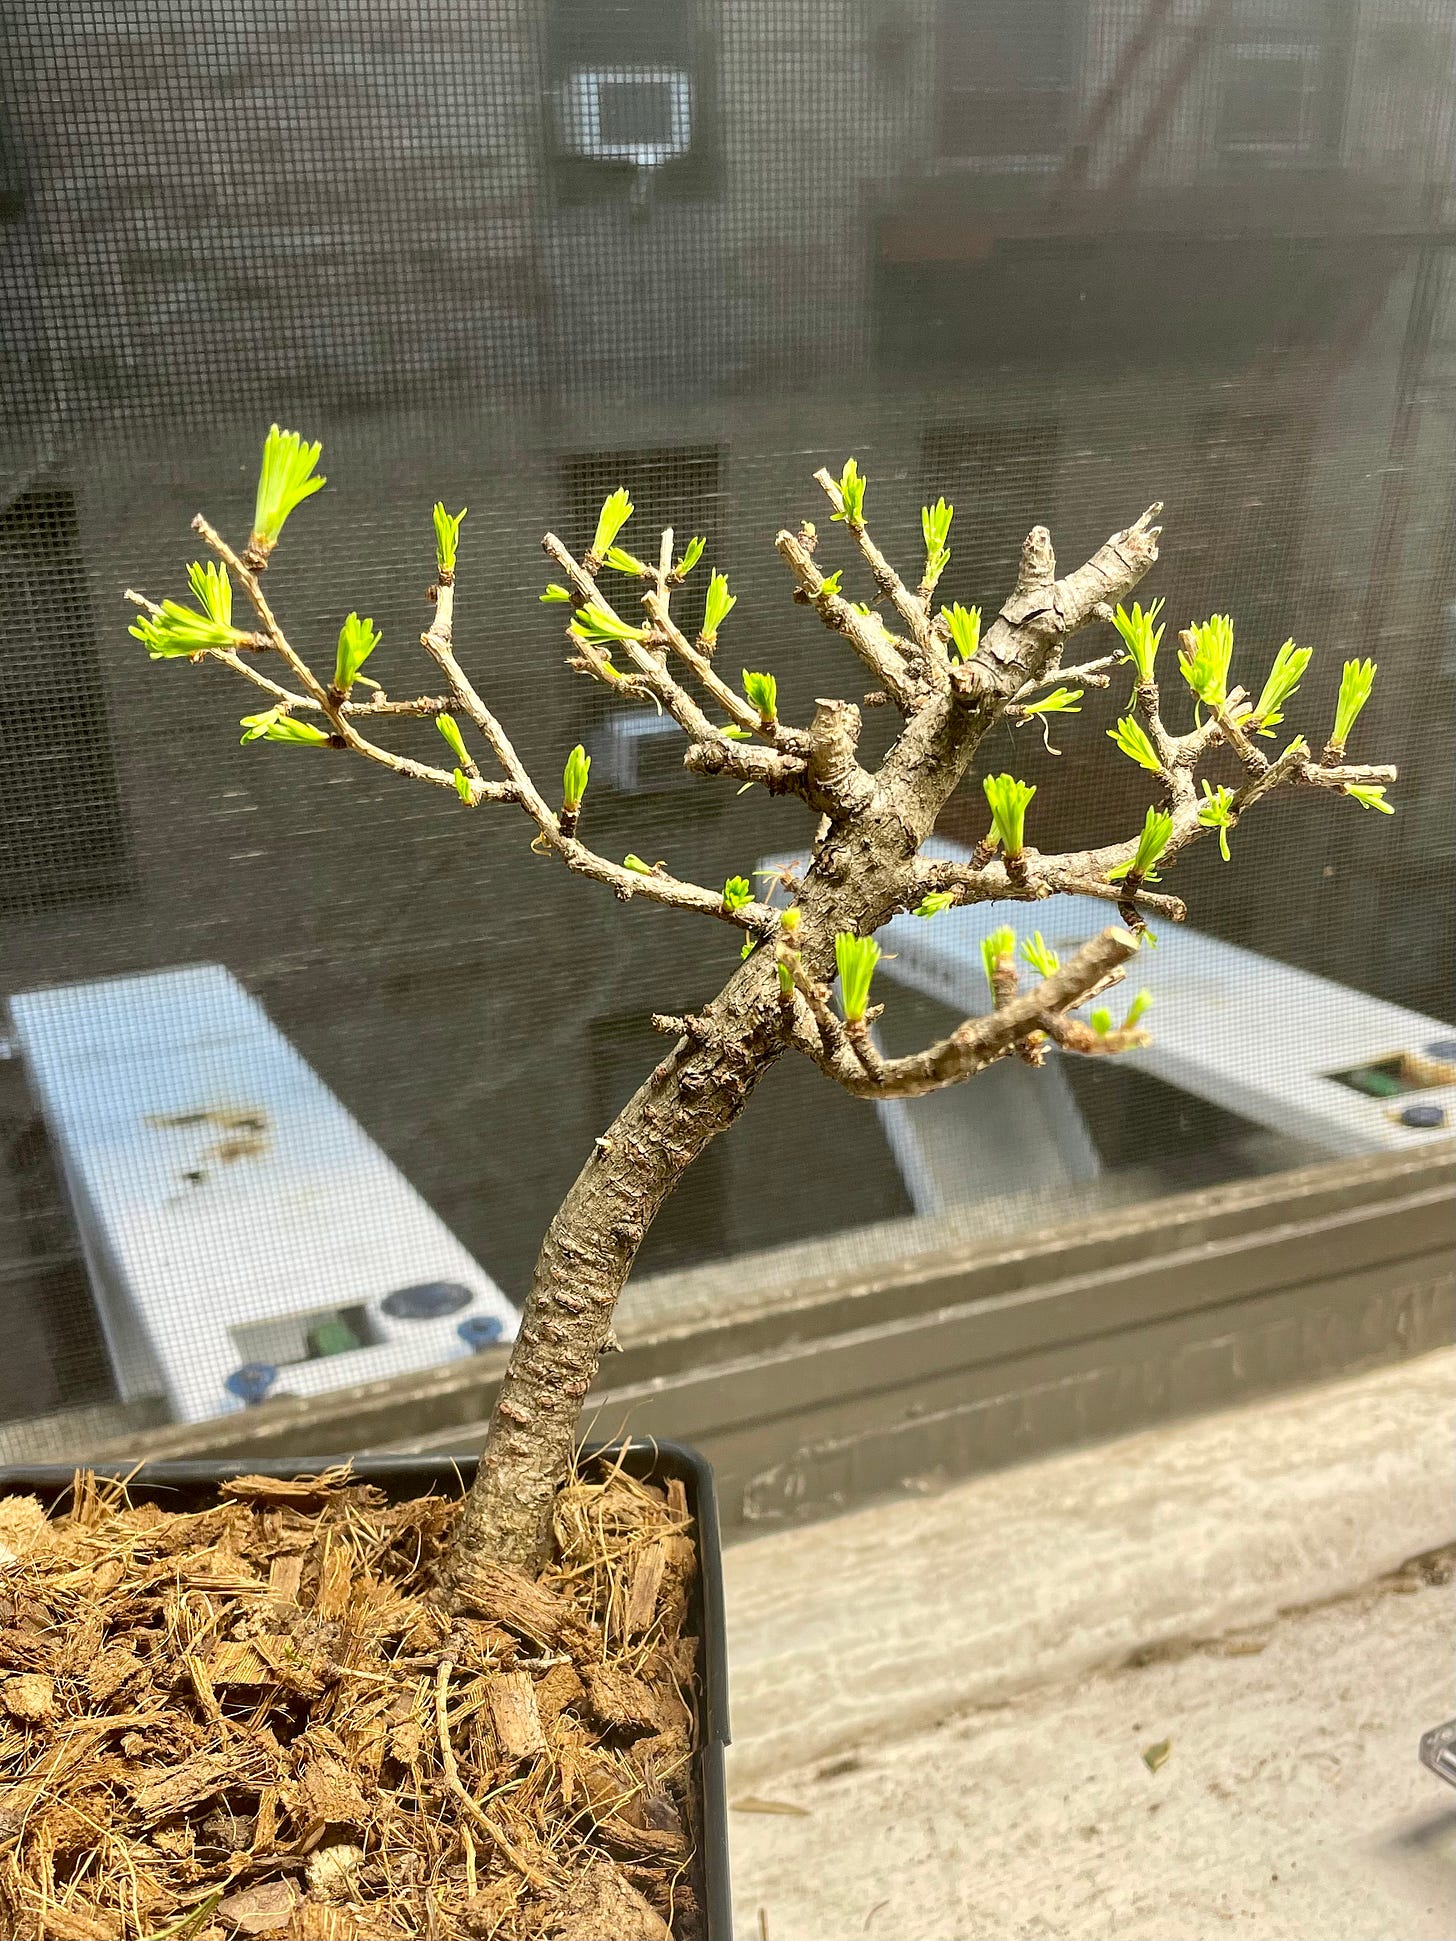 ID: Newly pruned tree viewed from the side